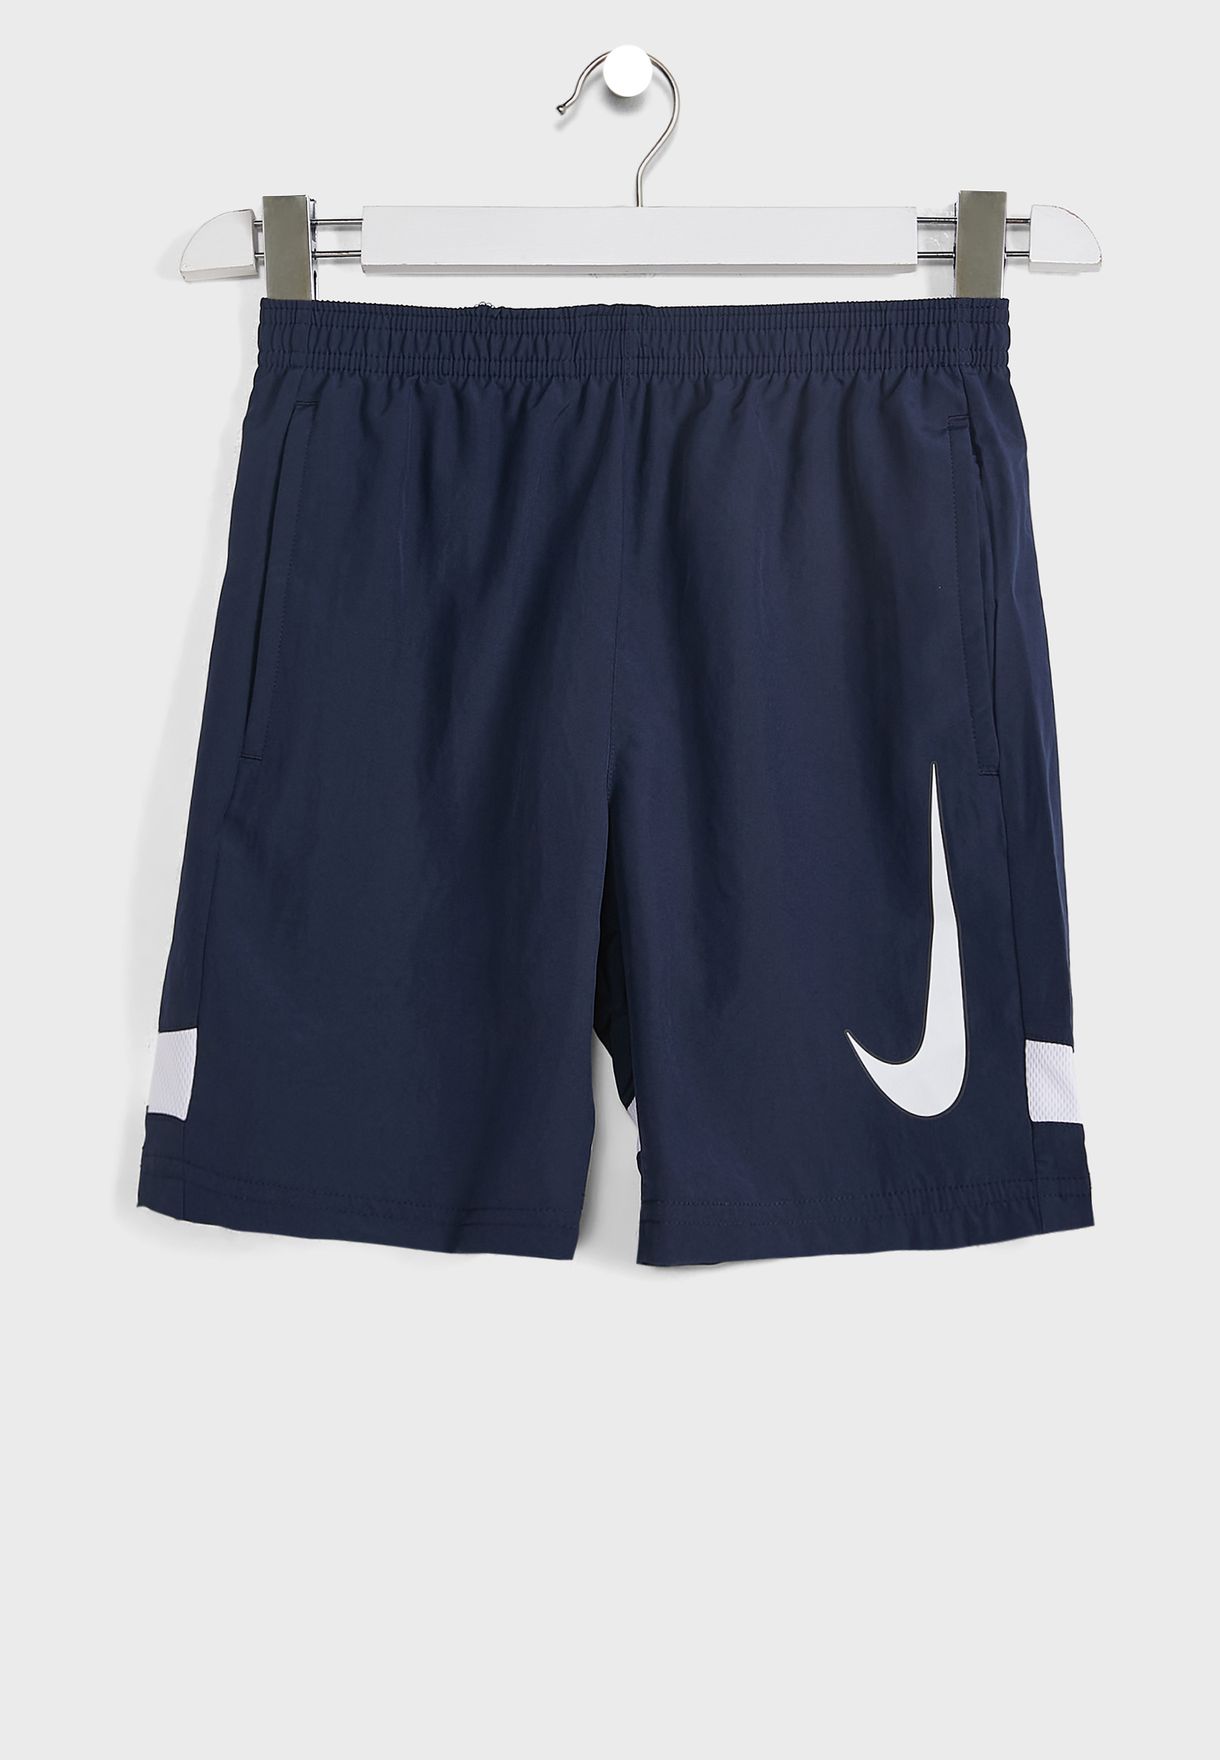 Youth Dri-Fit Academy Shorts